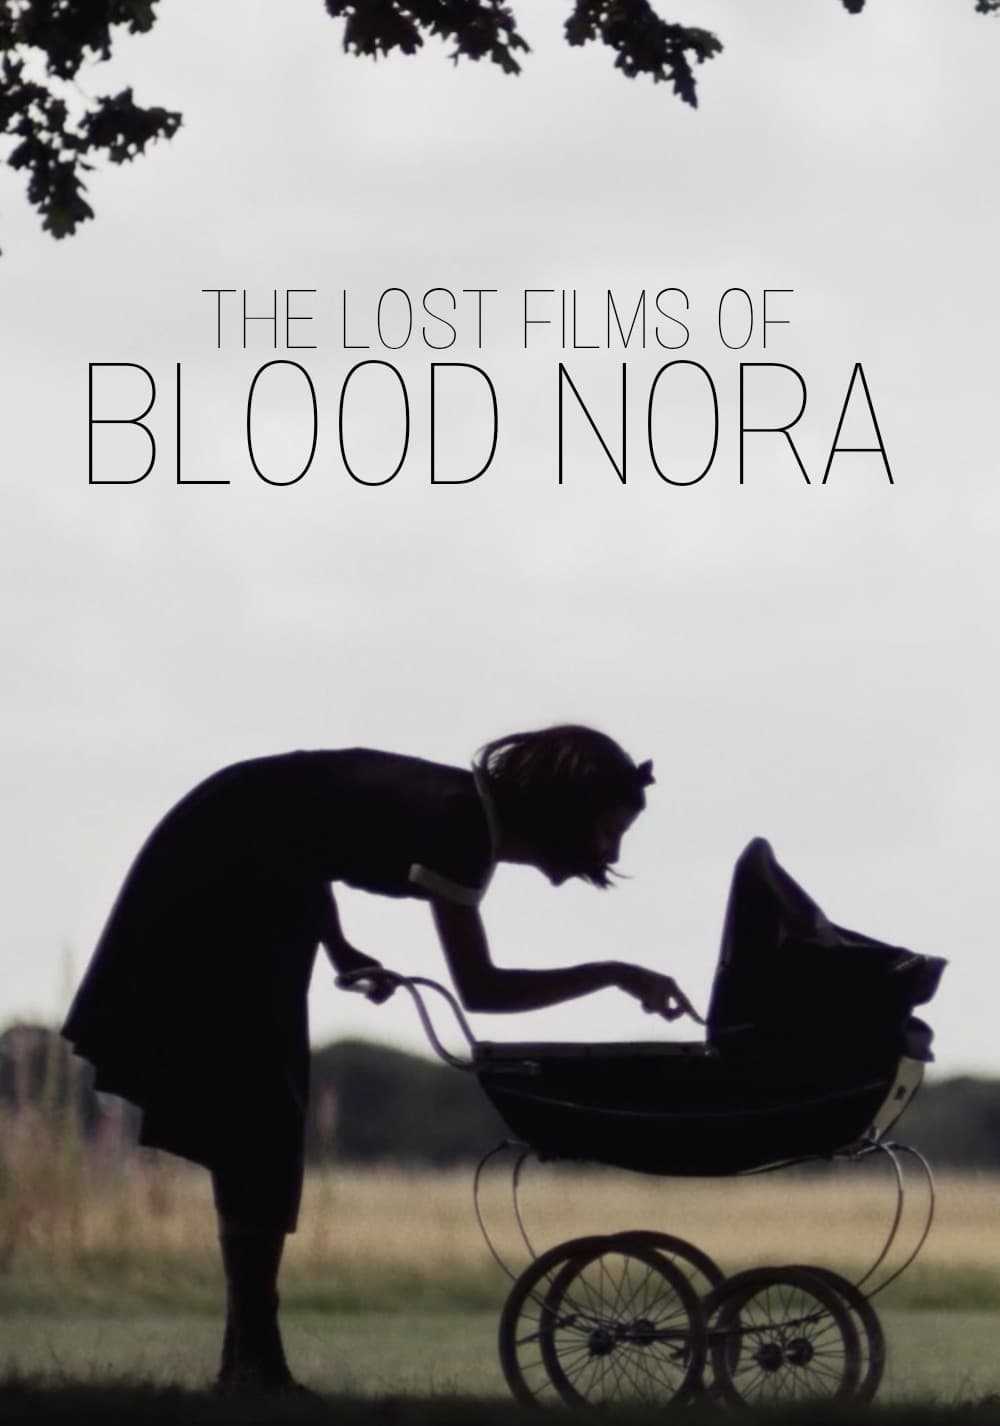 The Lost Films of Bloody Nora